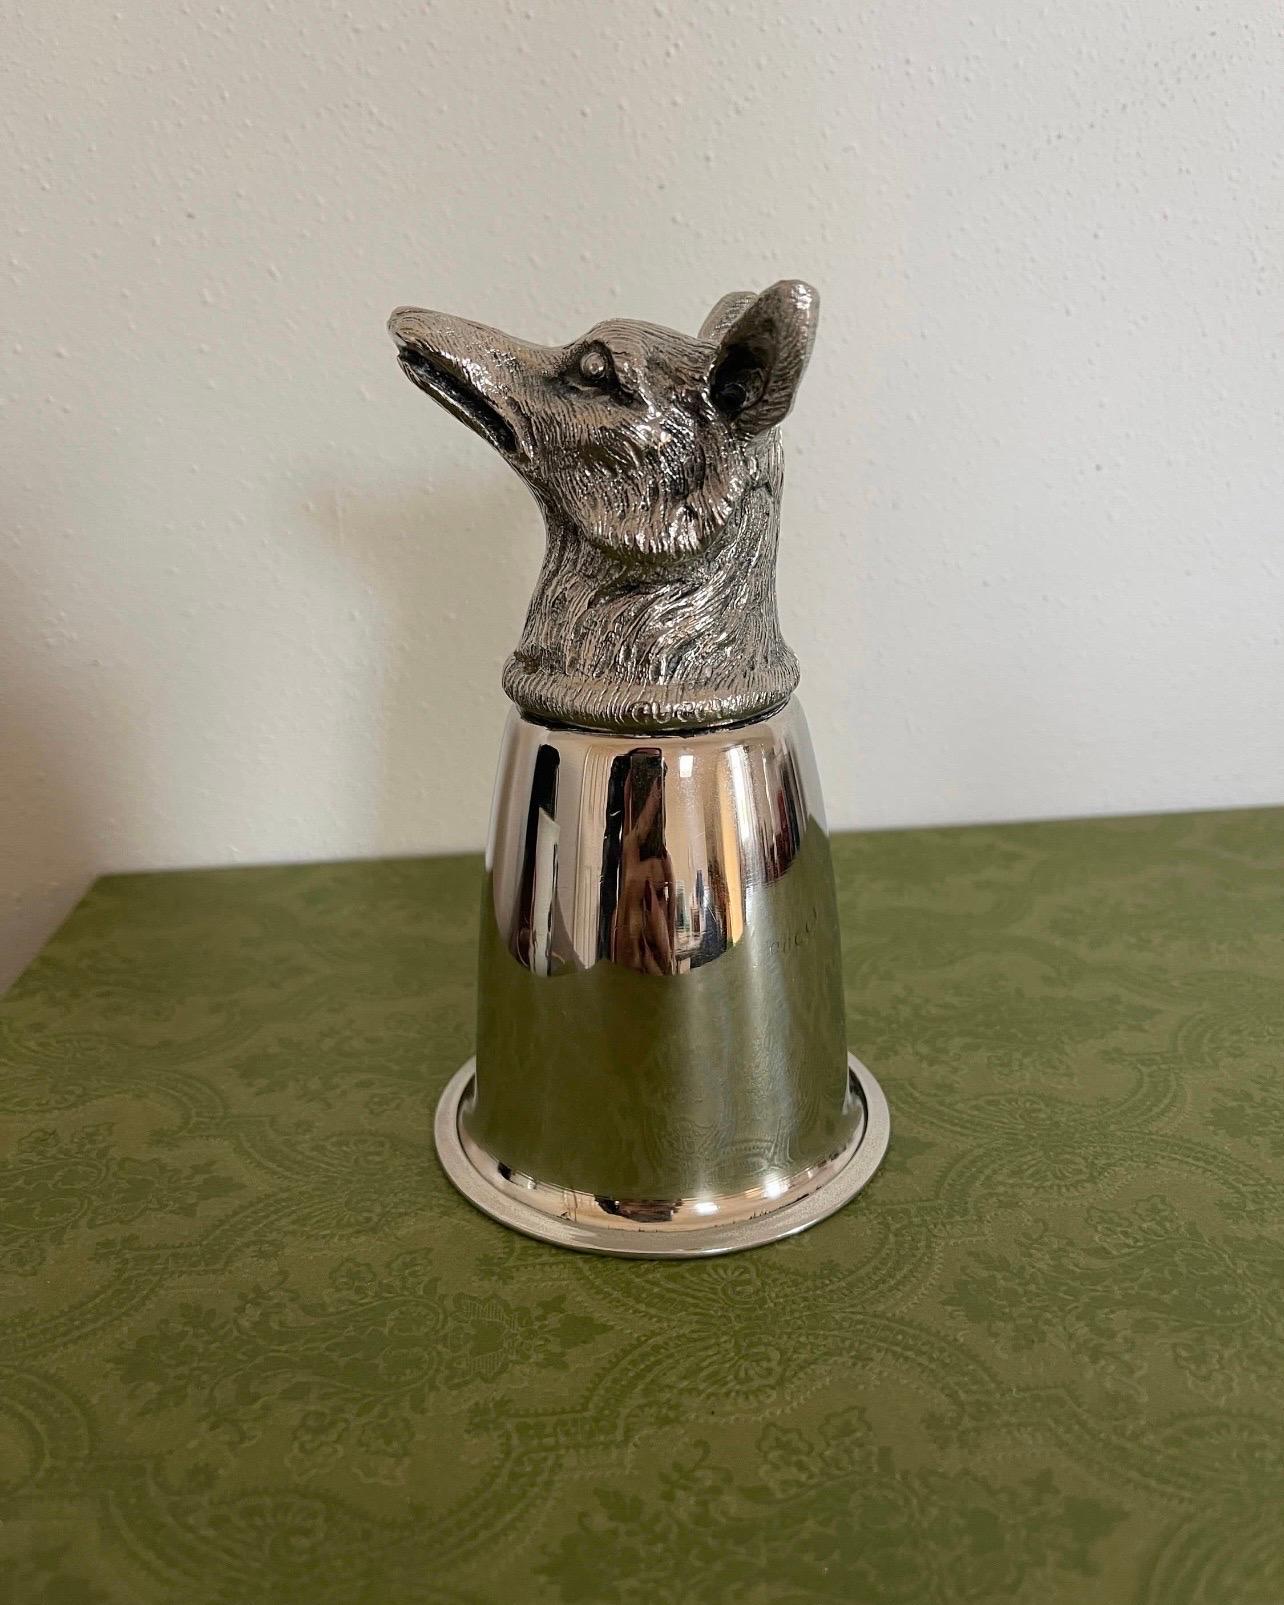 🖤 Collectors Dream 🖤

Authentic Vintage Gucci fox head silver stirrup cup. Circa 1970’s this stunning cup is made of pewter and brass and features a sculptured fox. Very cool and striking piece to add to your bar, library or anywhere you want to